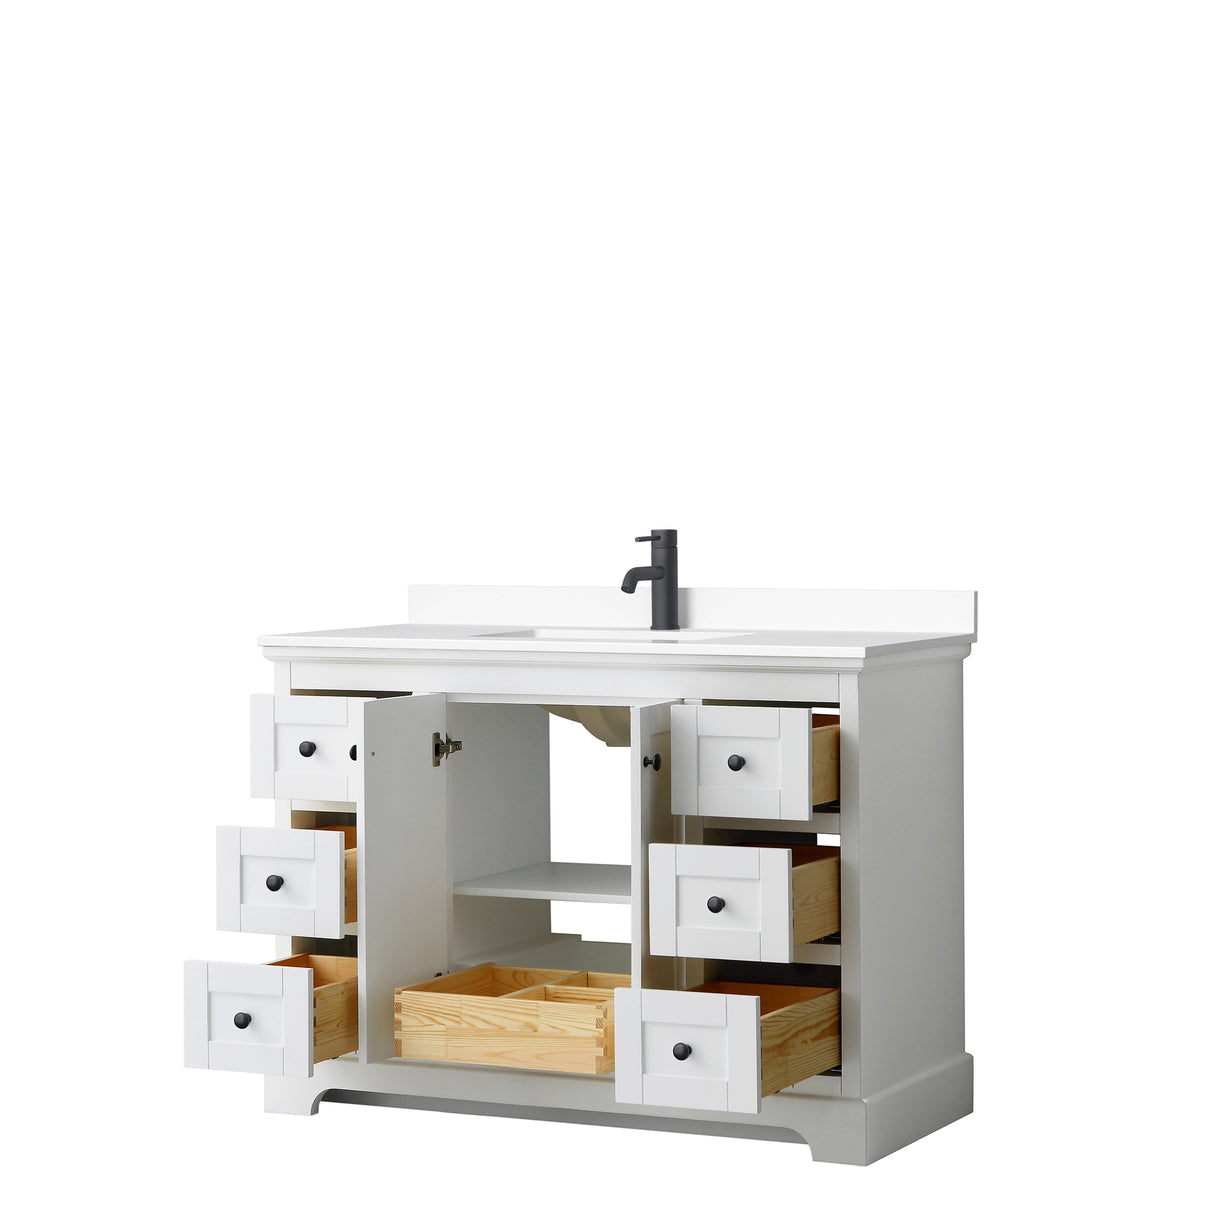 Avery 48 Inch Single Bathroom Vanity in White White Cultured Marble Countertop Undermount Square Sink Matte Black Trim